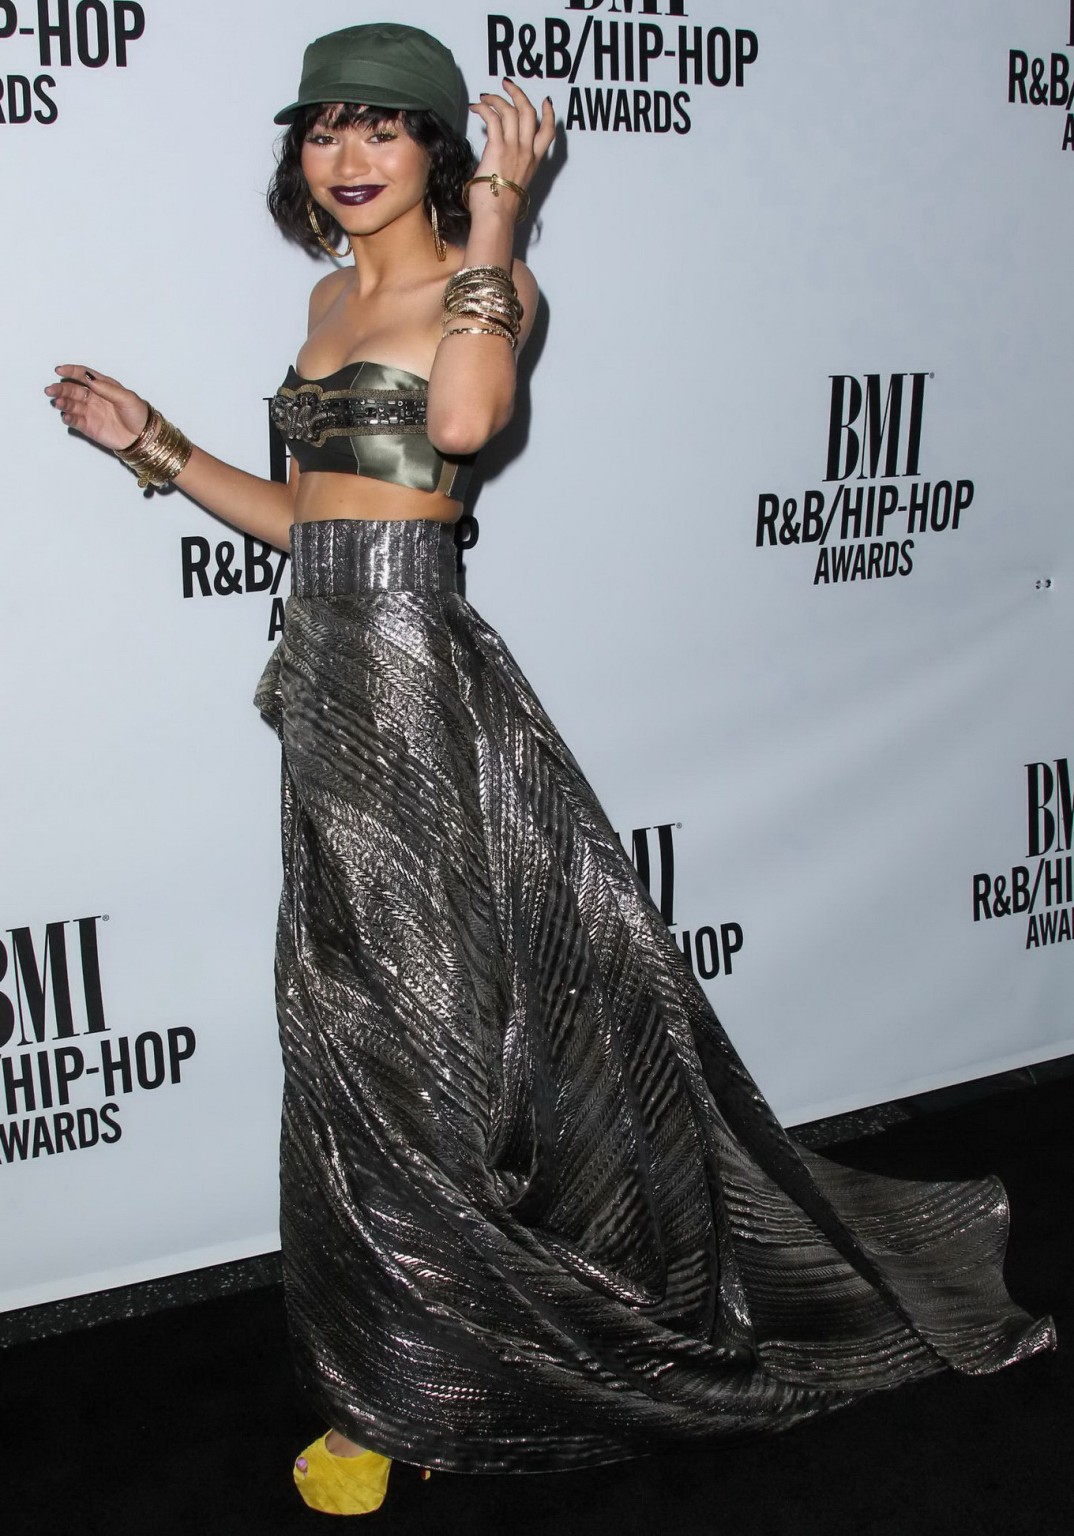 Zendaya Coleman shows off her boobs in a tiny belly top at BMI RB Hip Hop Awards #75187503